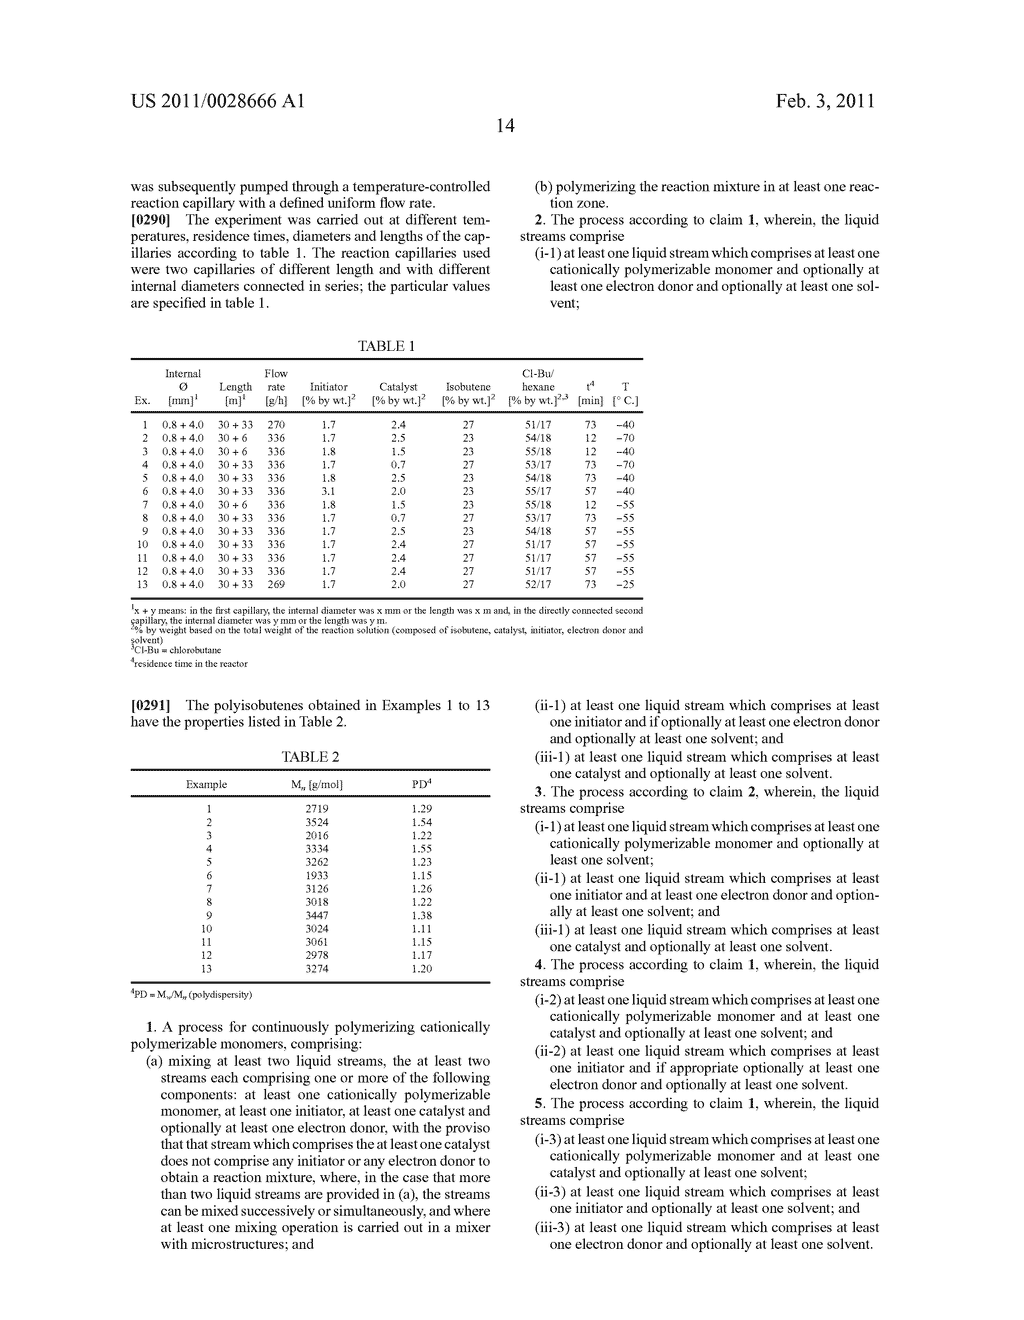 PROCESS AND APPARATUS FOR CONTINUOUSLY POLYMERIZING CATIONICALLY POLYMERIZABLE MONOMERS - diagram, schematic, and image 16